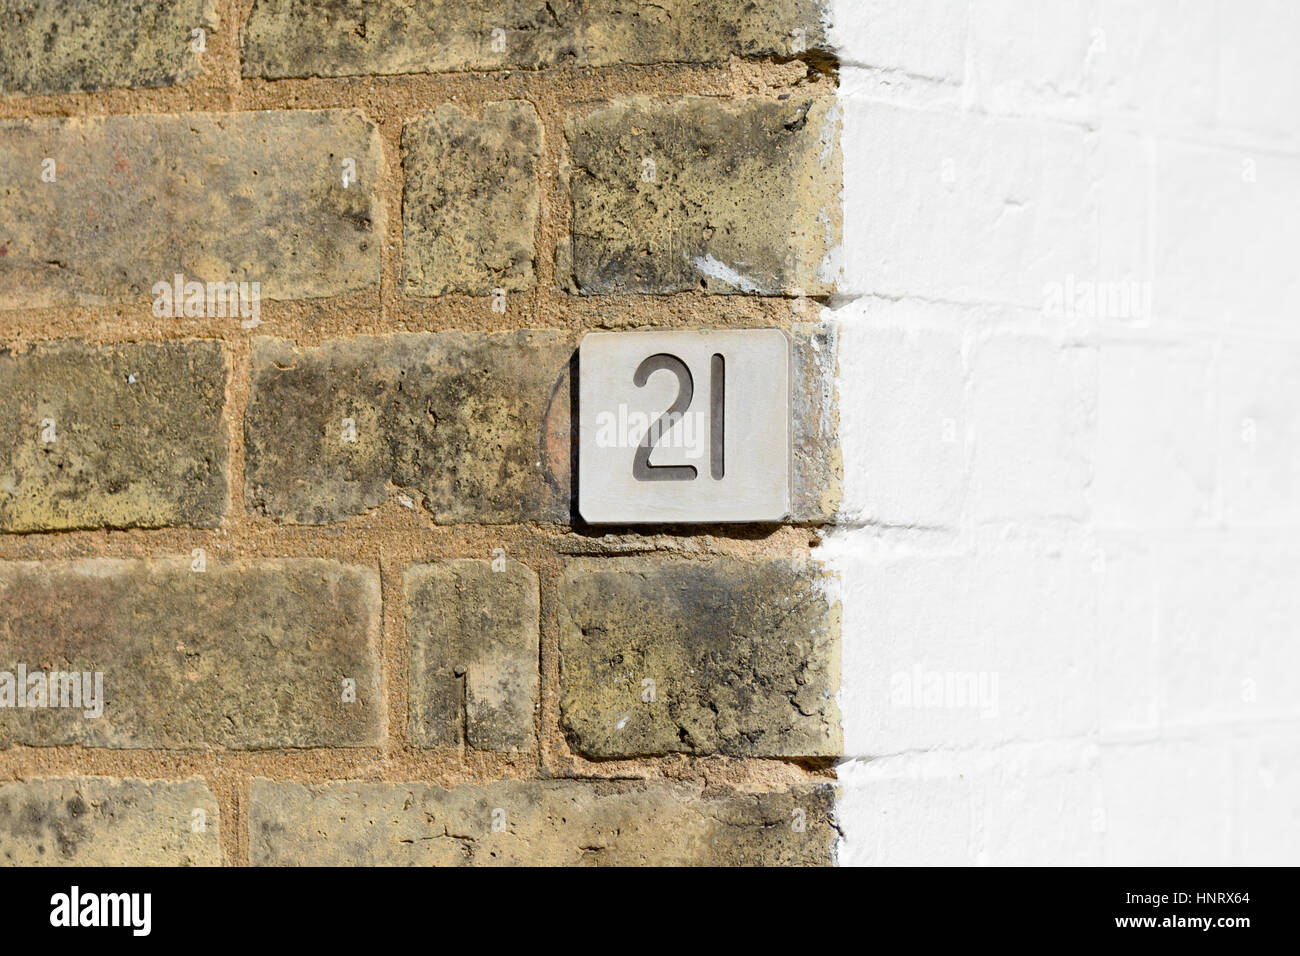 House number 21 sign on wall Stock Photo